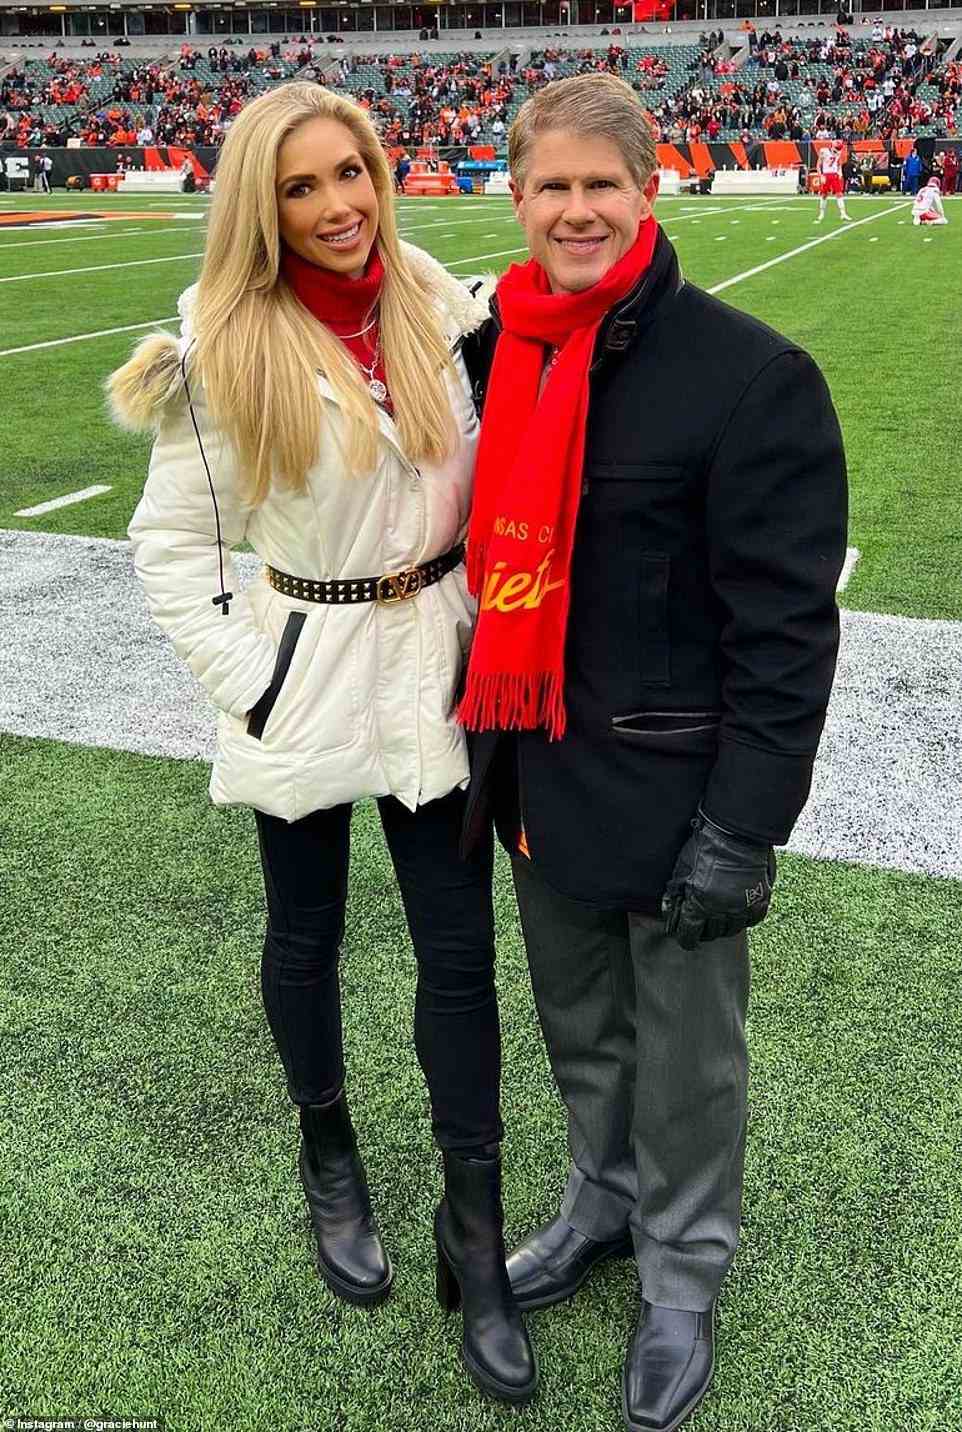 Her dad, Clark, is the owner, chairman, and CEO of the Kansas City Chiefs, while her grandfather, Lamar Hunt, was the founder of the American Football League (AFL) and Major League Soccer (MLS). She is pictured with her dad